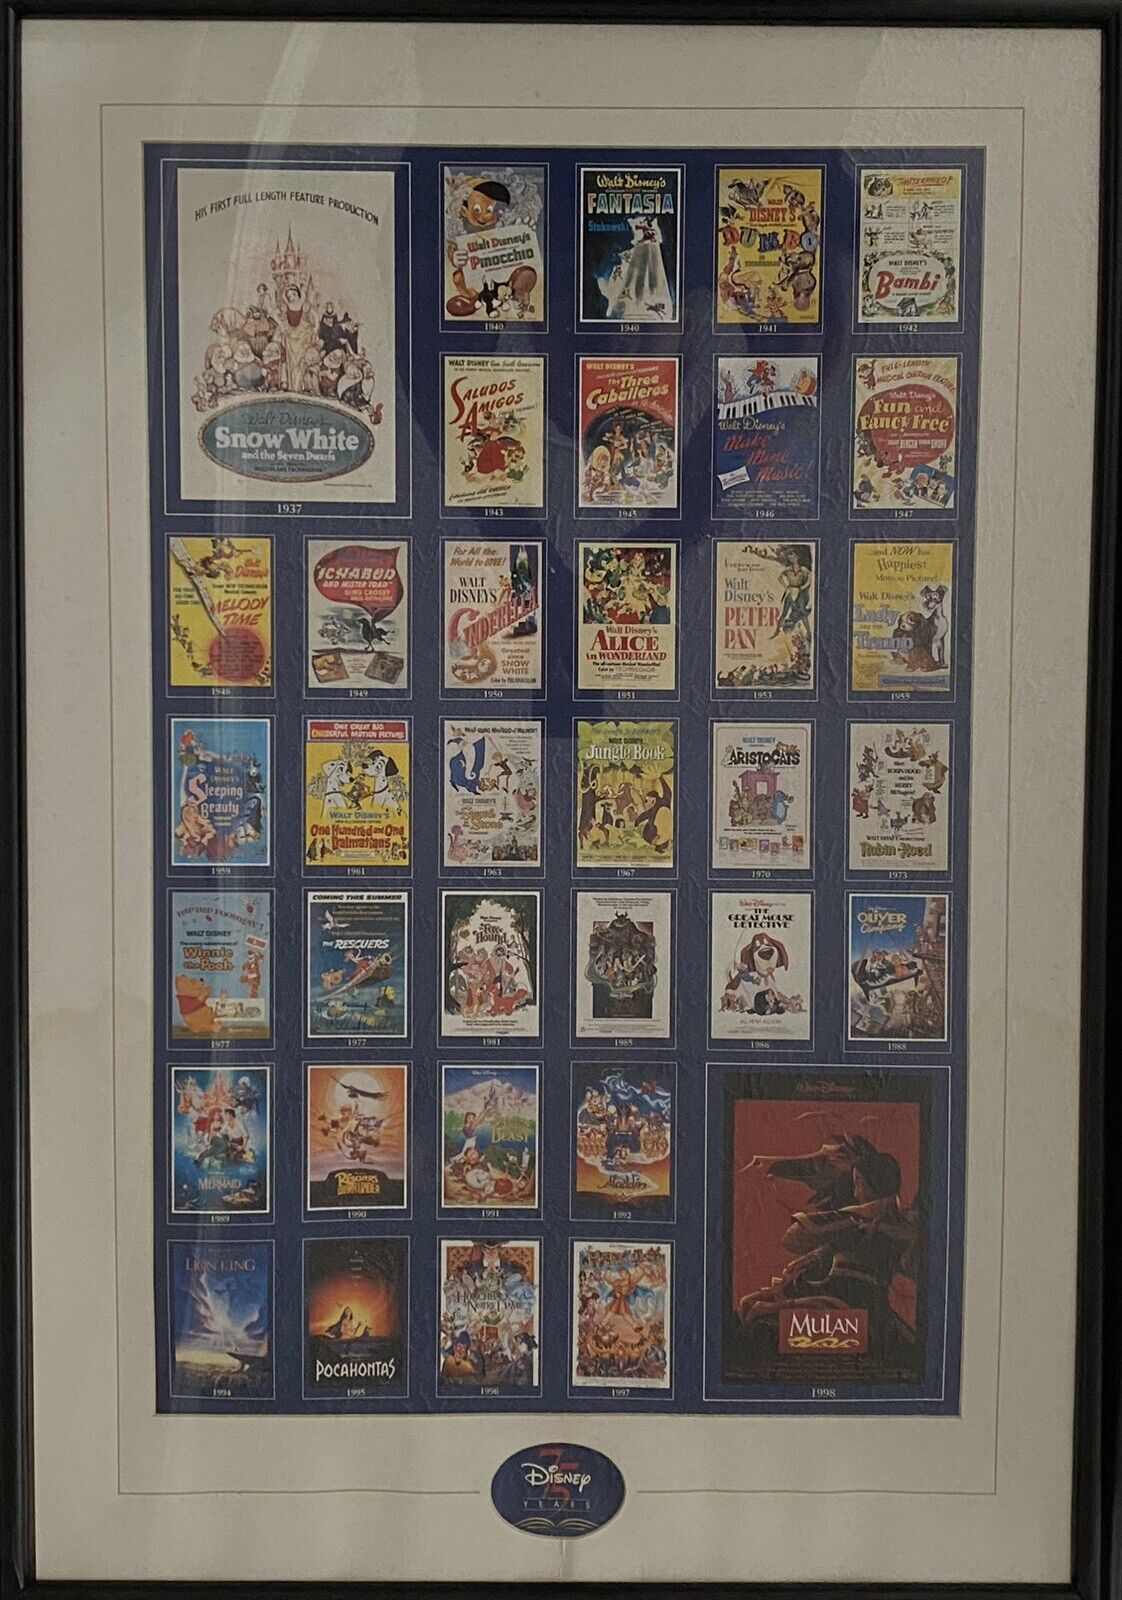 DISNEY GALLERY ART 75 YEARS OF ANIMATION MOVIE POSTERS 1937 To 1998 RARE/LARGE